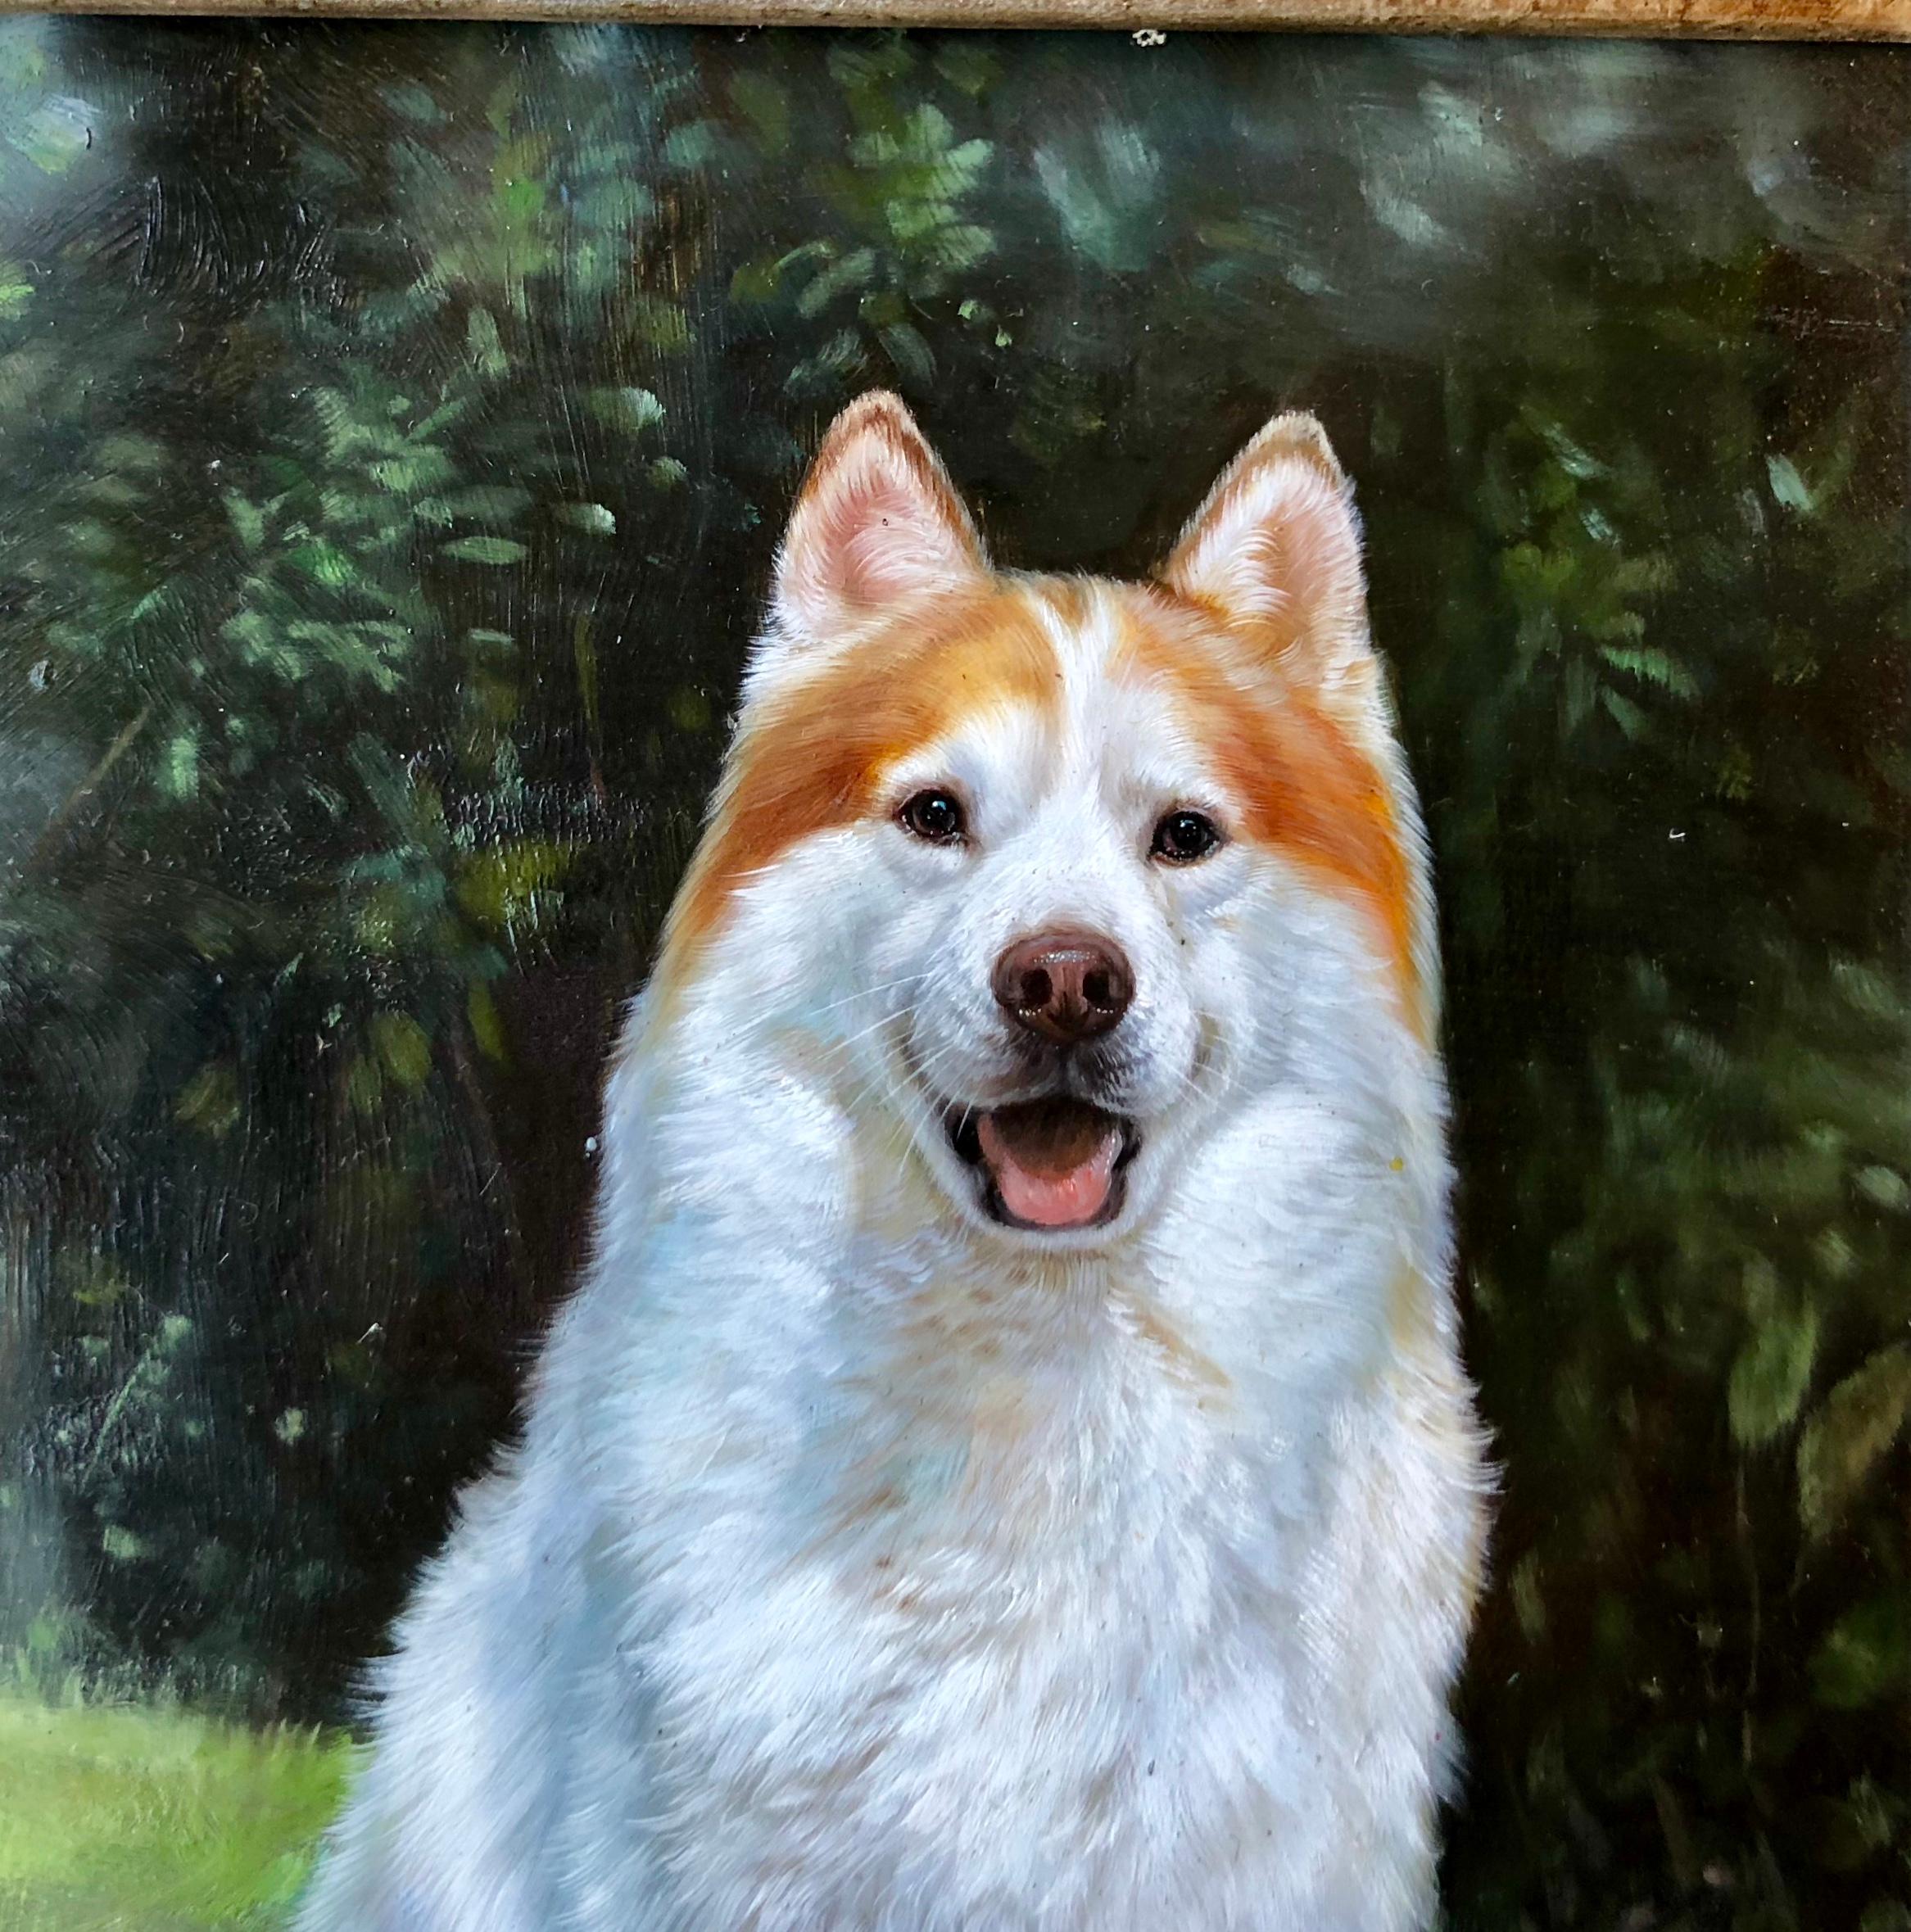 Exquisitely rendered, original oil on board, signed estate painting by French artist, Girard, depicts an alert, seated white husky dog in grass, with red ear and face markings and a big, fluffy tail. Realistic painting has shining, engaging eyes, an